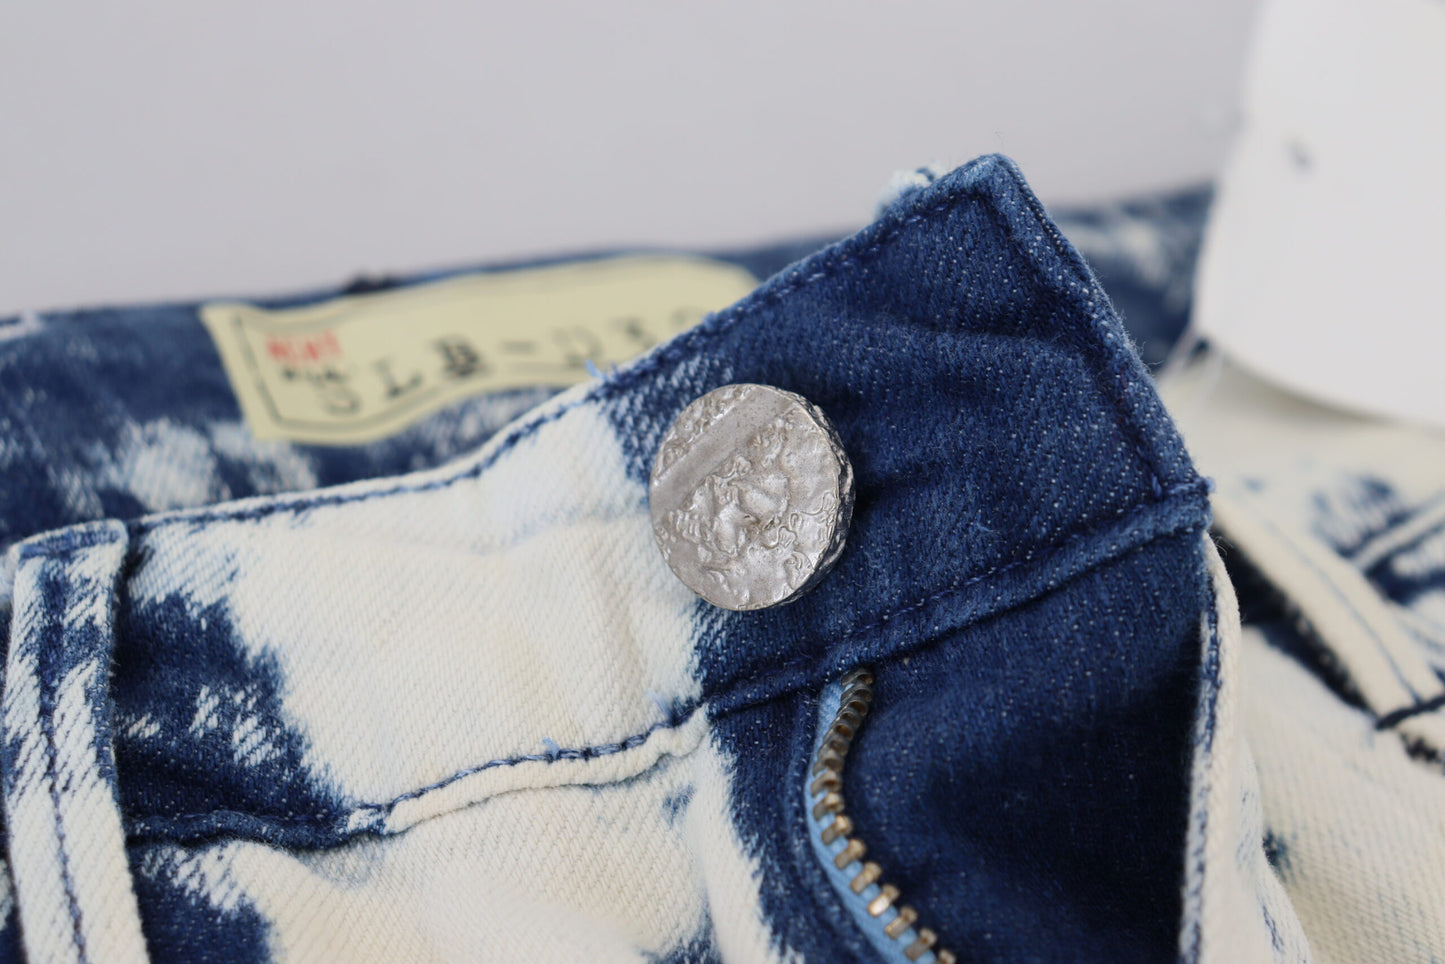 Acht White Blue Cotton Skinny Women Tattered Denim Jeans - Designed by Acht Available to Buy at a Discounted Price on Moon Behind The Hill Online Designer Discount Store